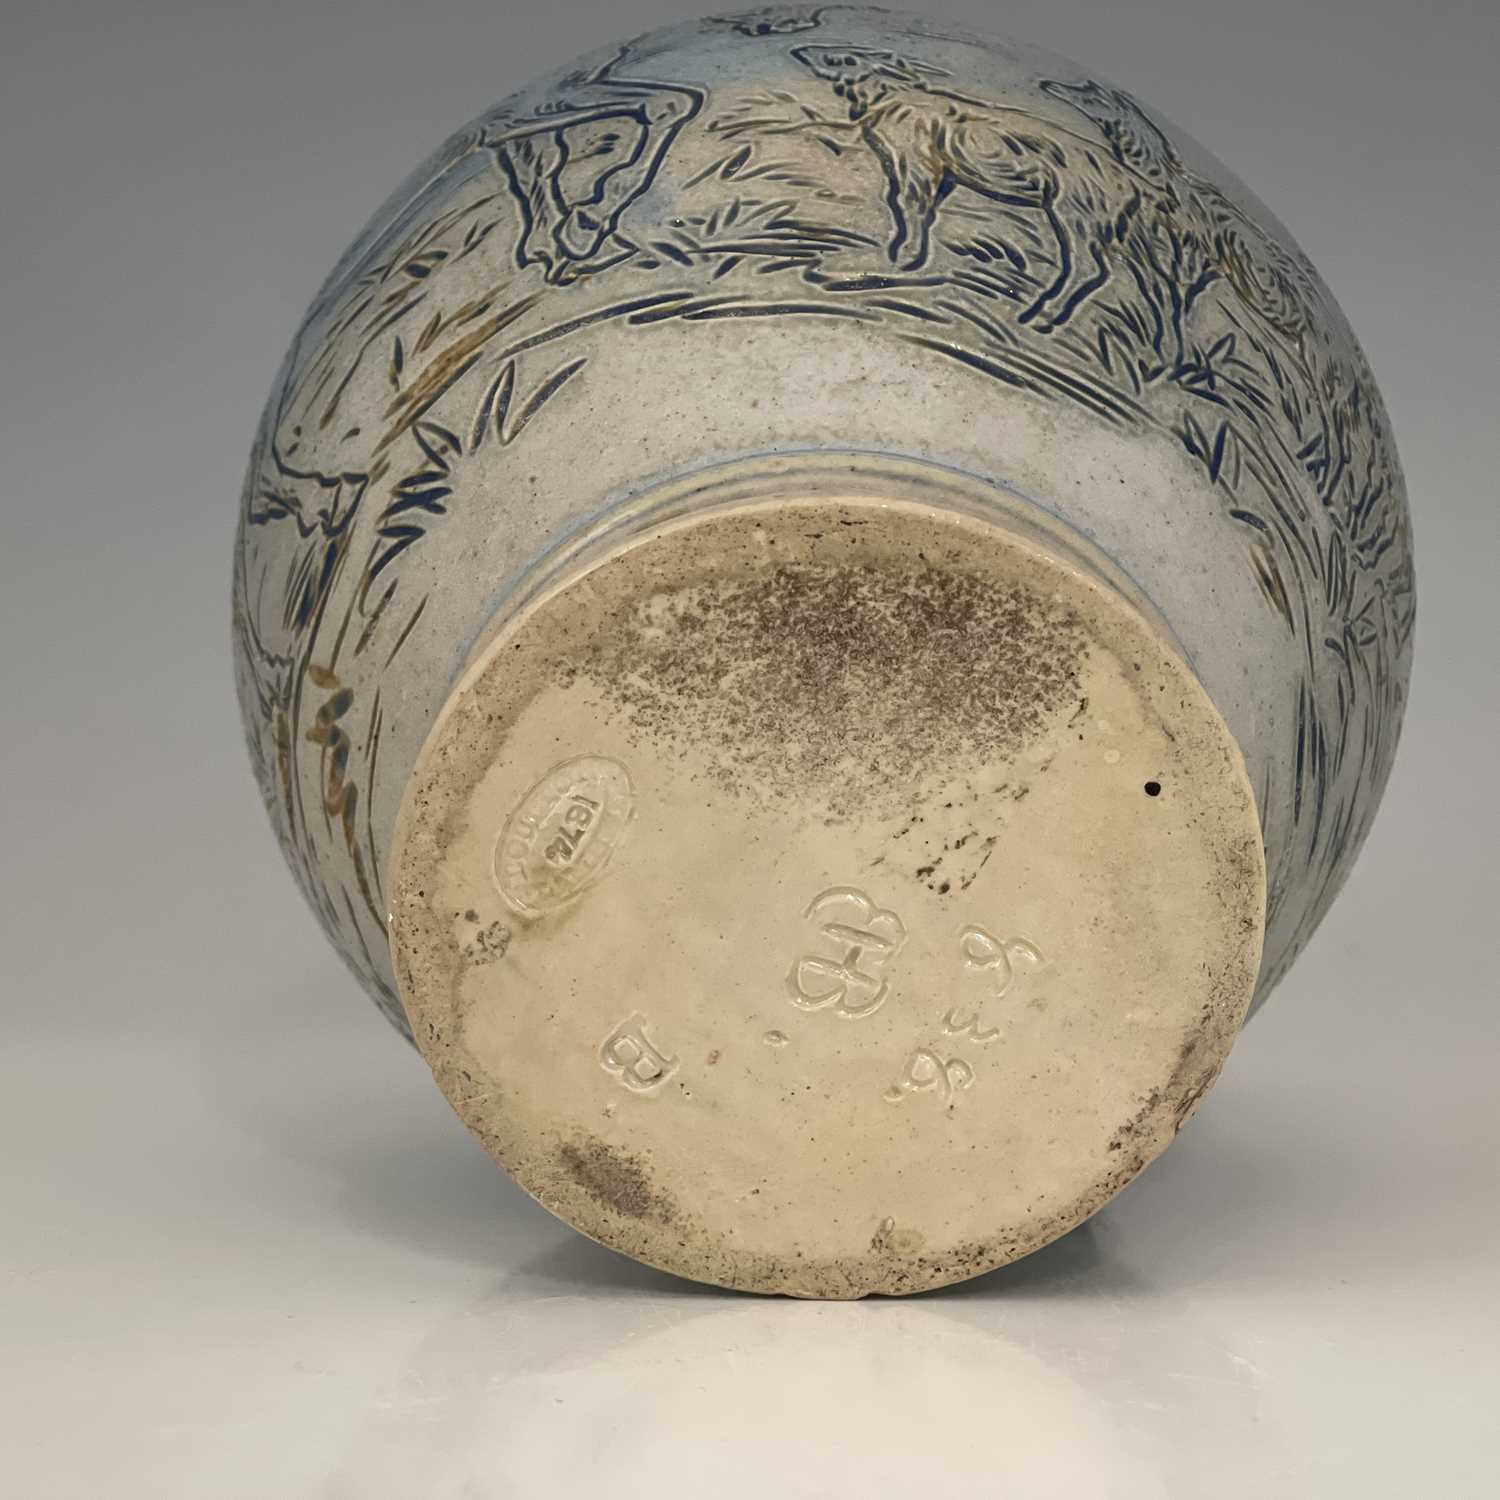 Hannah Barlow for Doulton Lambeth, a stoneware jug, 1874, shouldered ovoid form, sgraffito decorated - Image 6 of 9